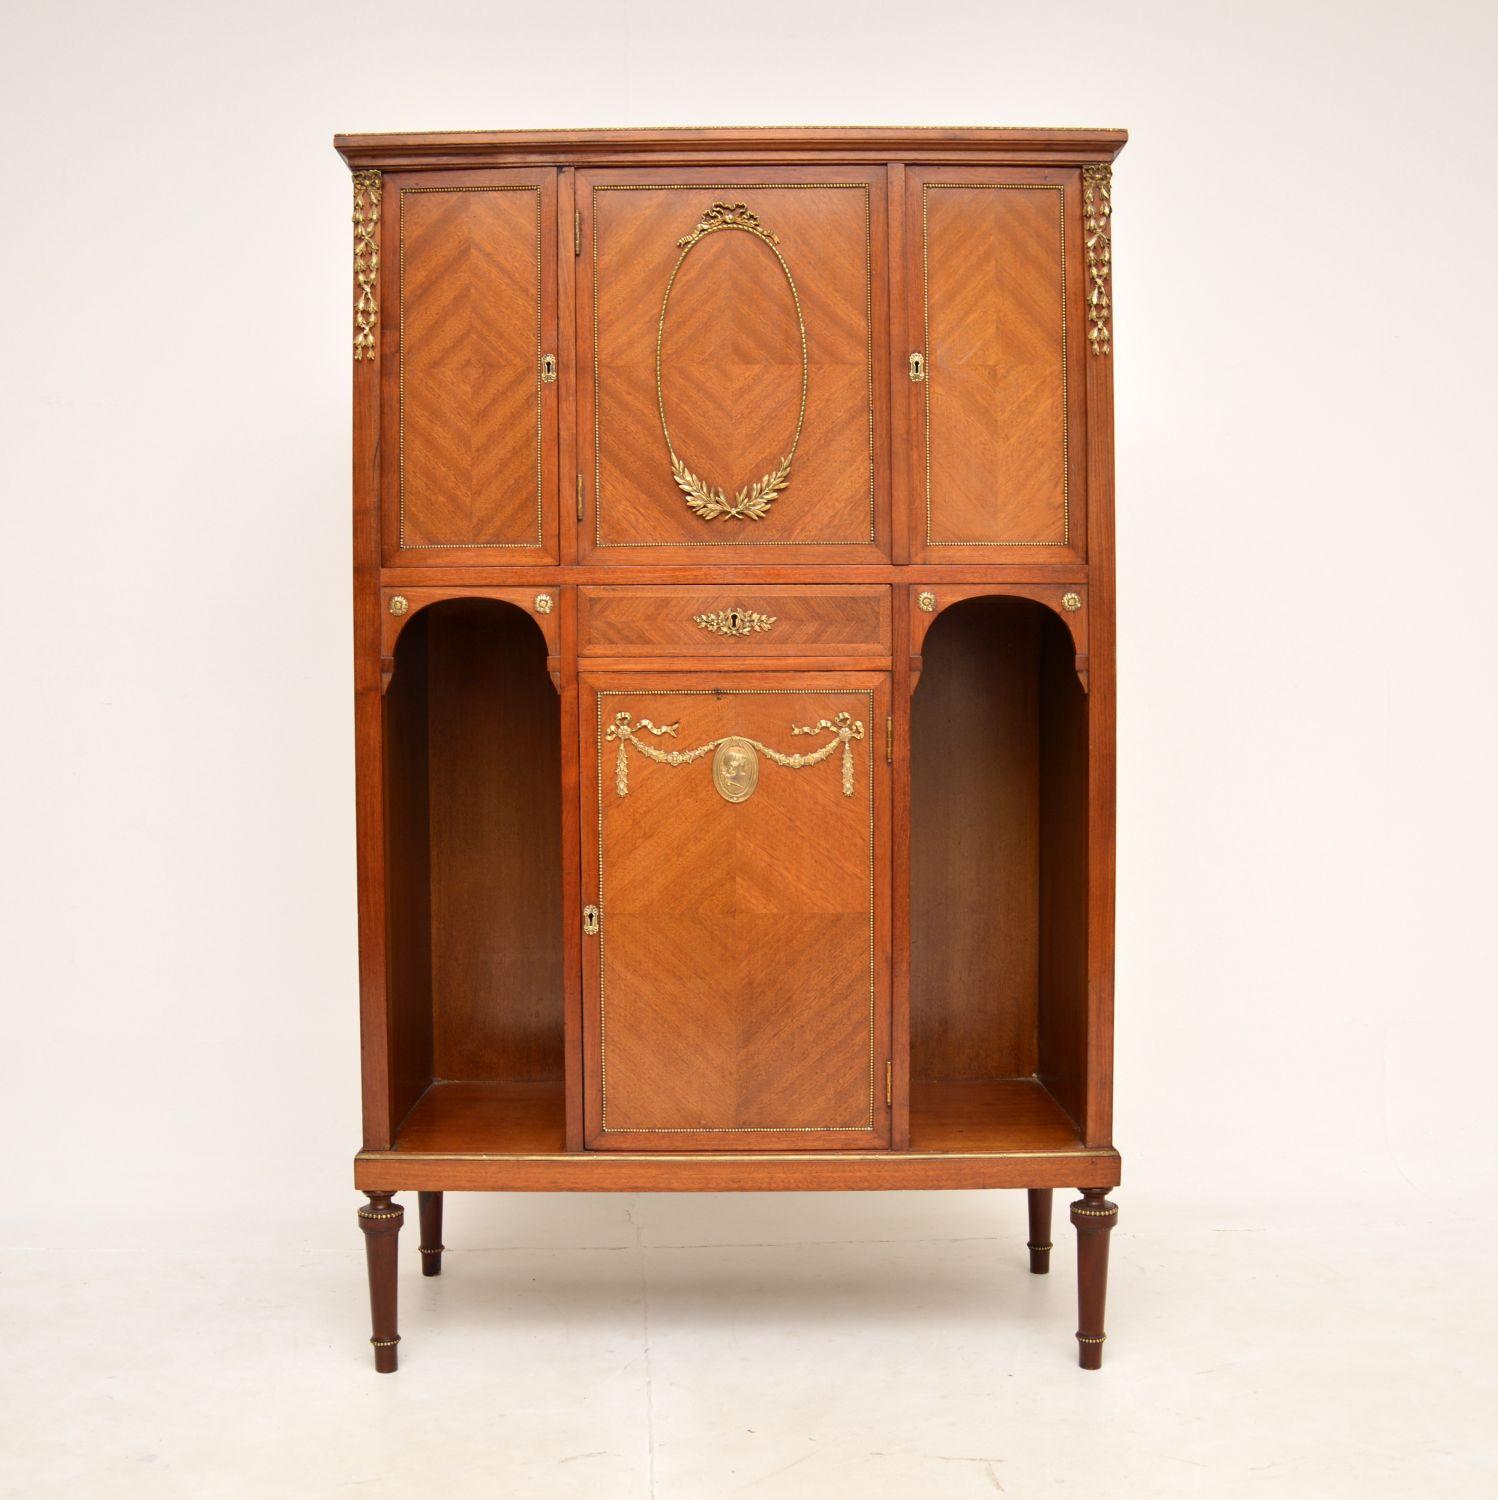 A beautiful original antique cabinet, this was made in France and dates from around the 1890-1910 period.

It is of superb quality, with stunning ormolu mounts throughout. There is lots of storage space inside, this is a useful size and is perfect